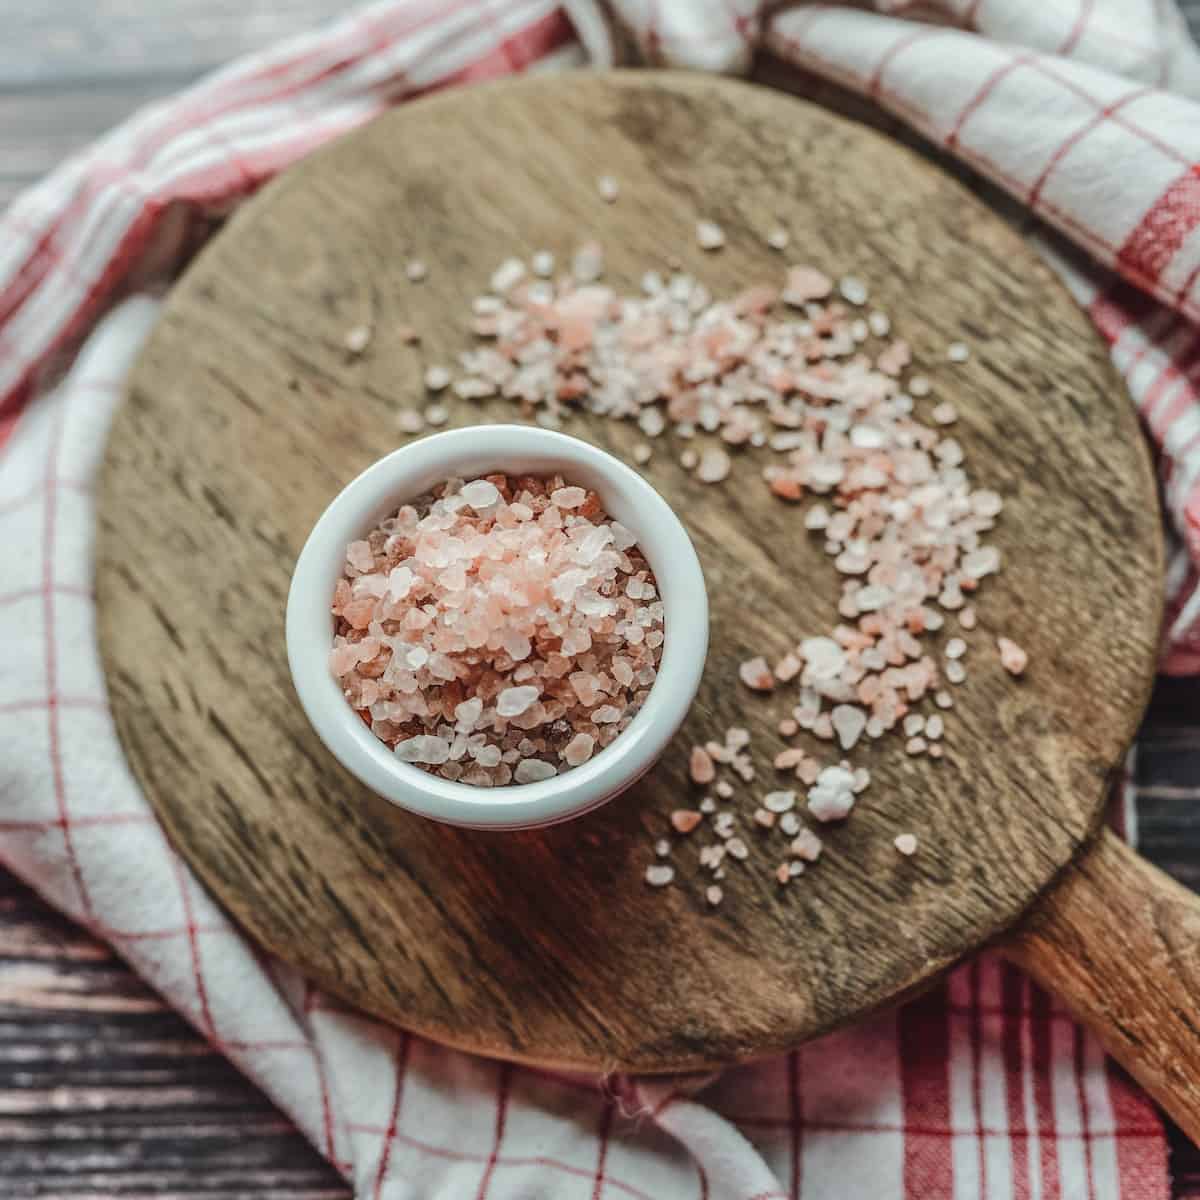 Pink rock salt in a small white bowl